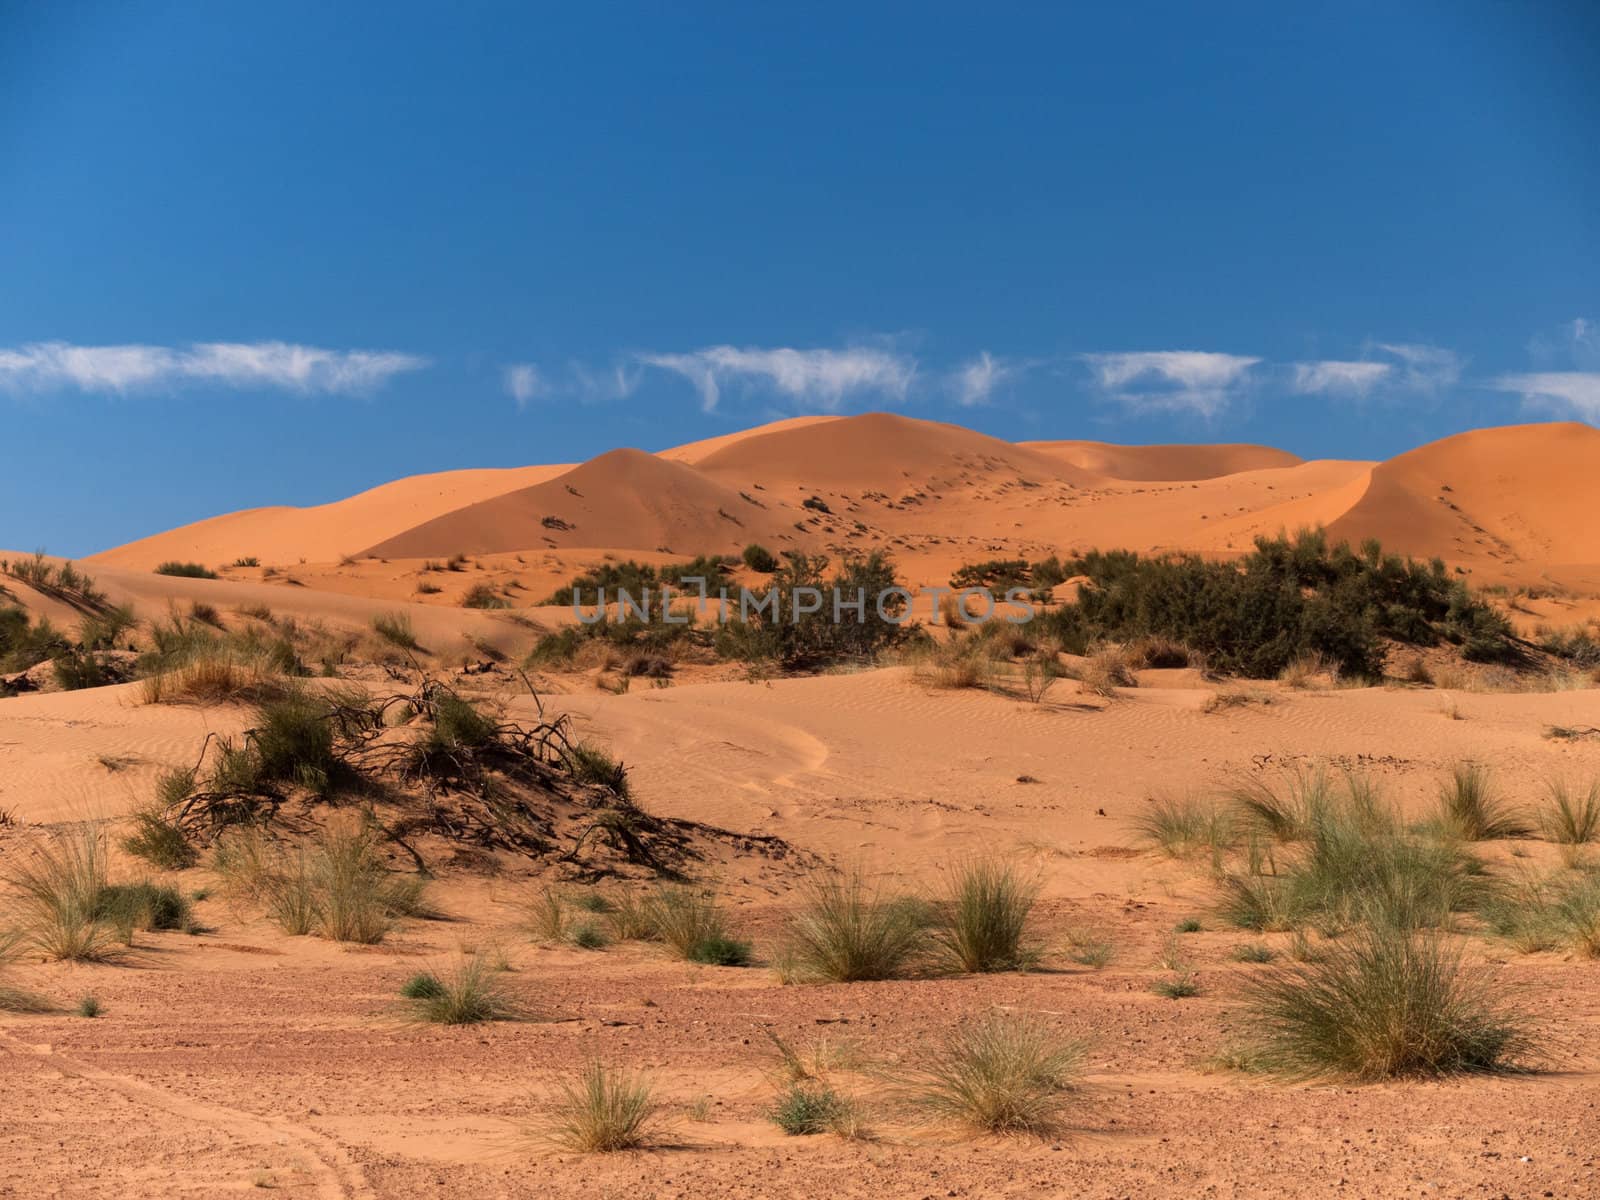 Bushes and sand dunes on the Sahara by rzoze19